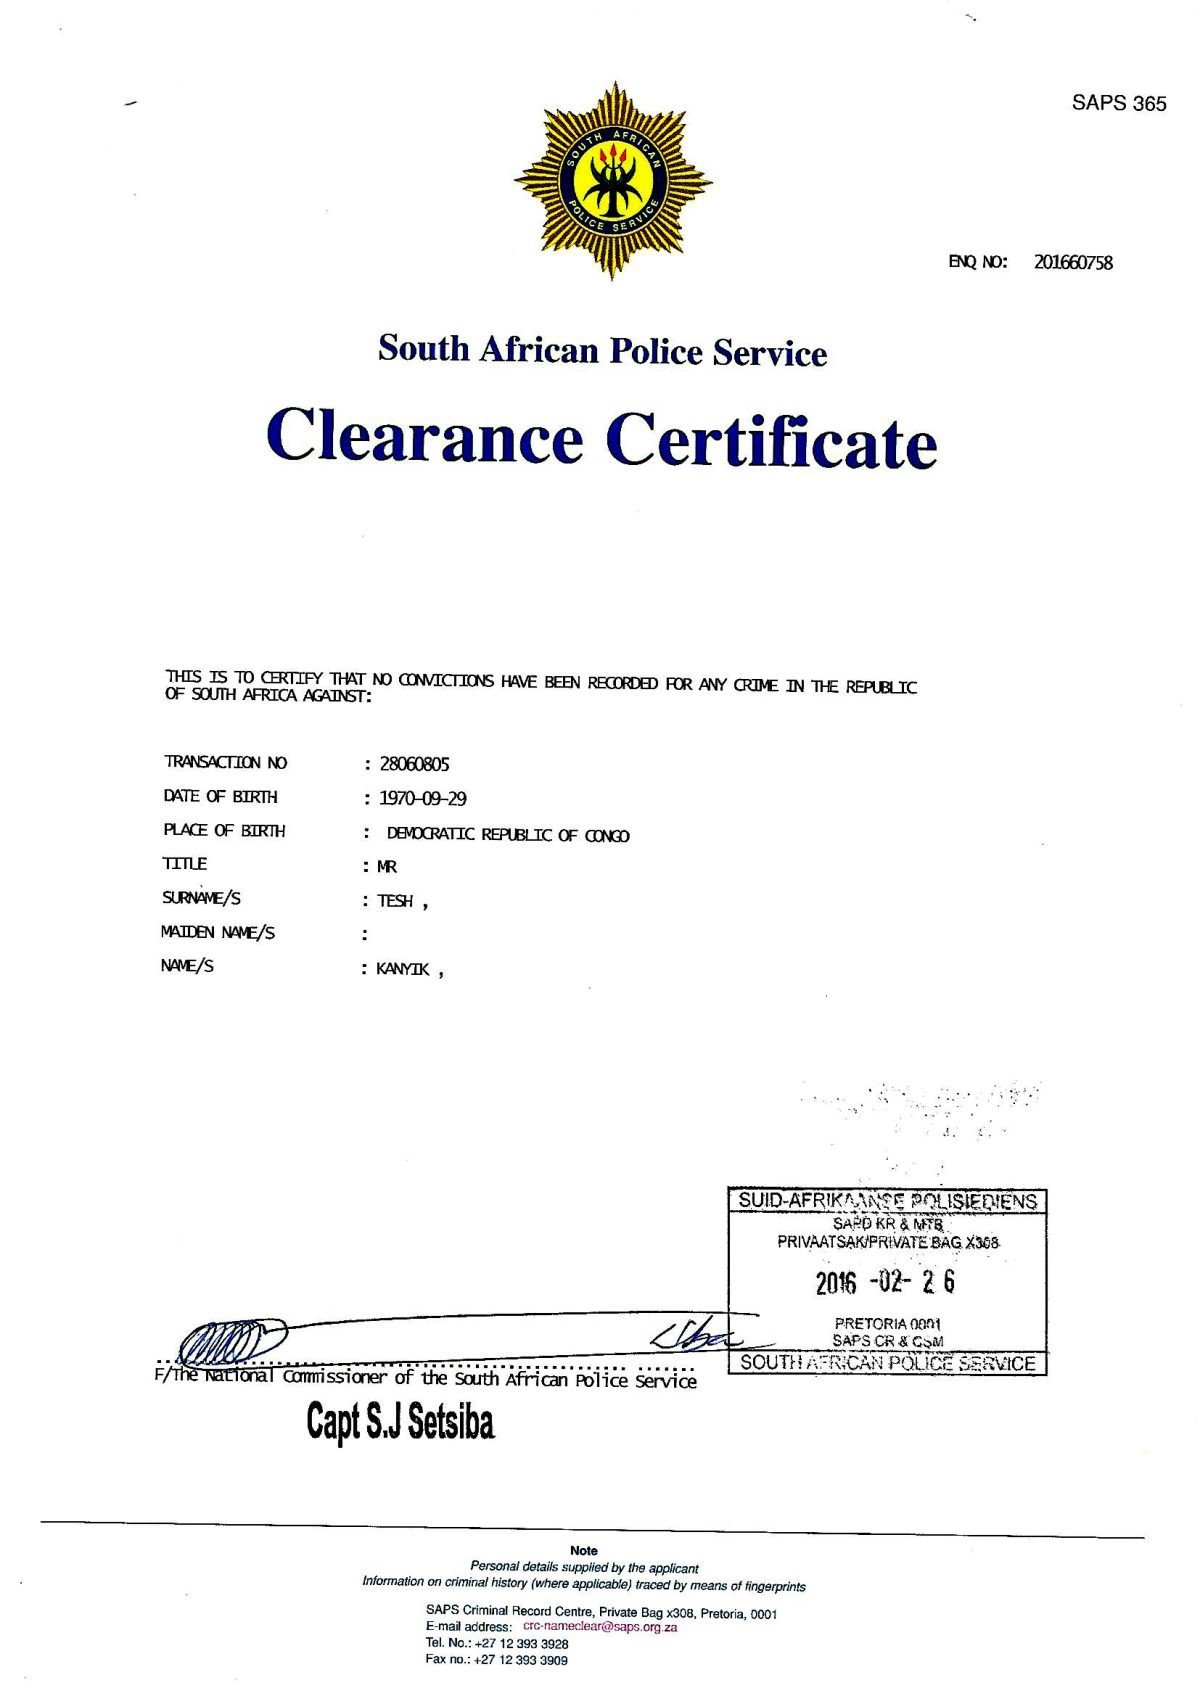 Saps Police Clearance Certificate a Concern for Security?